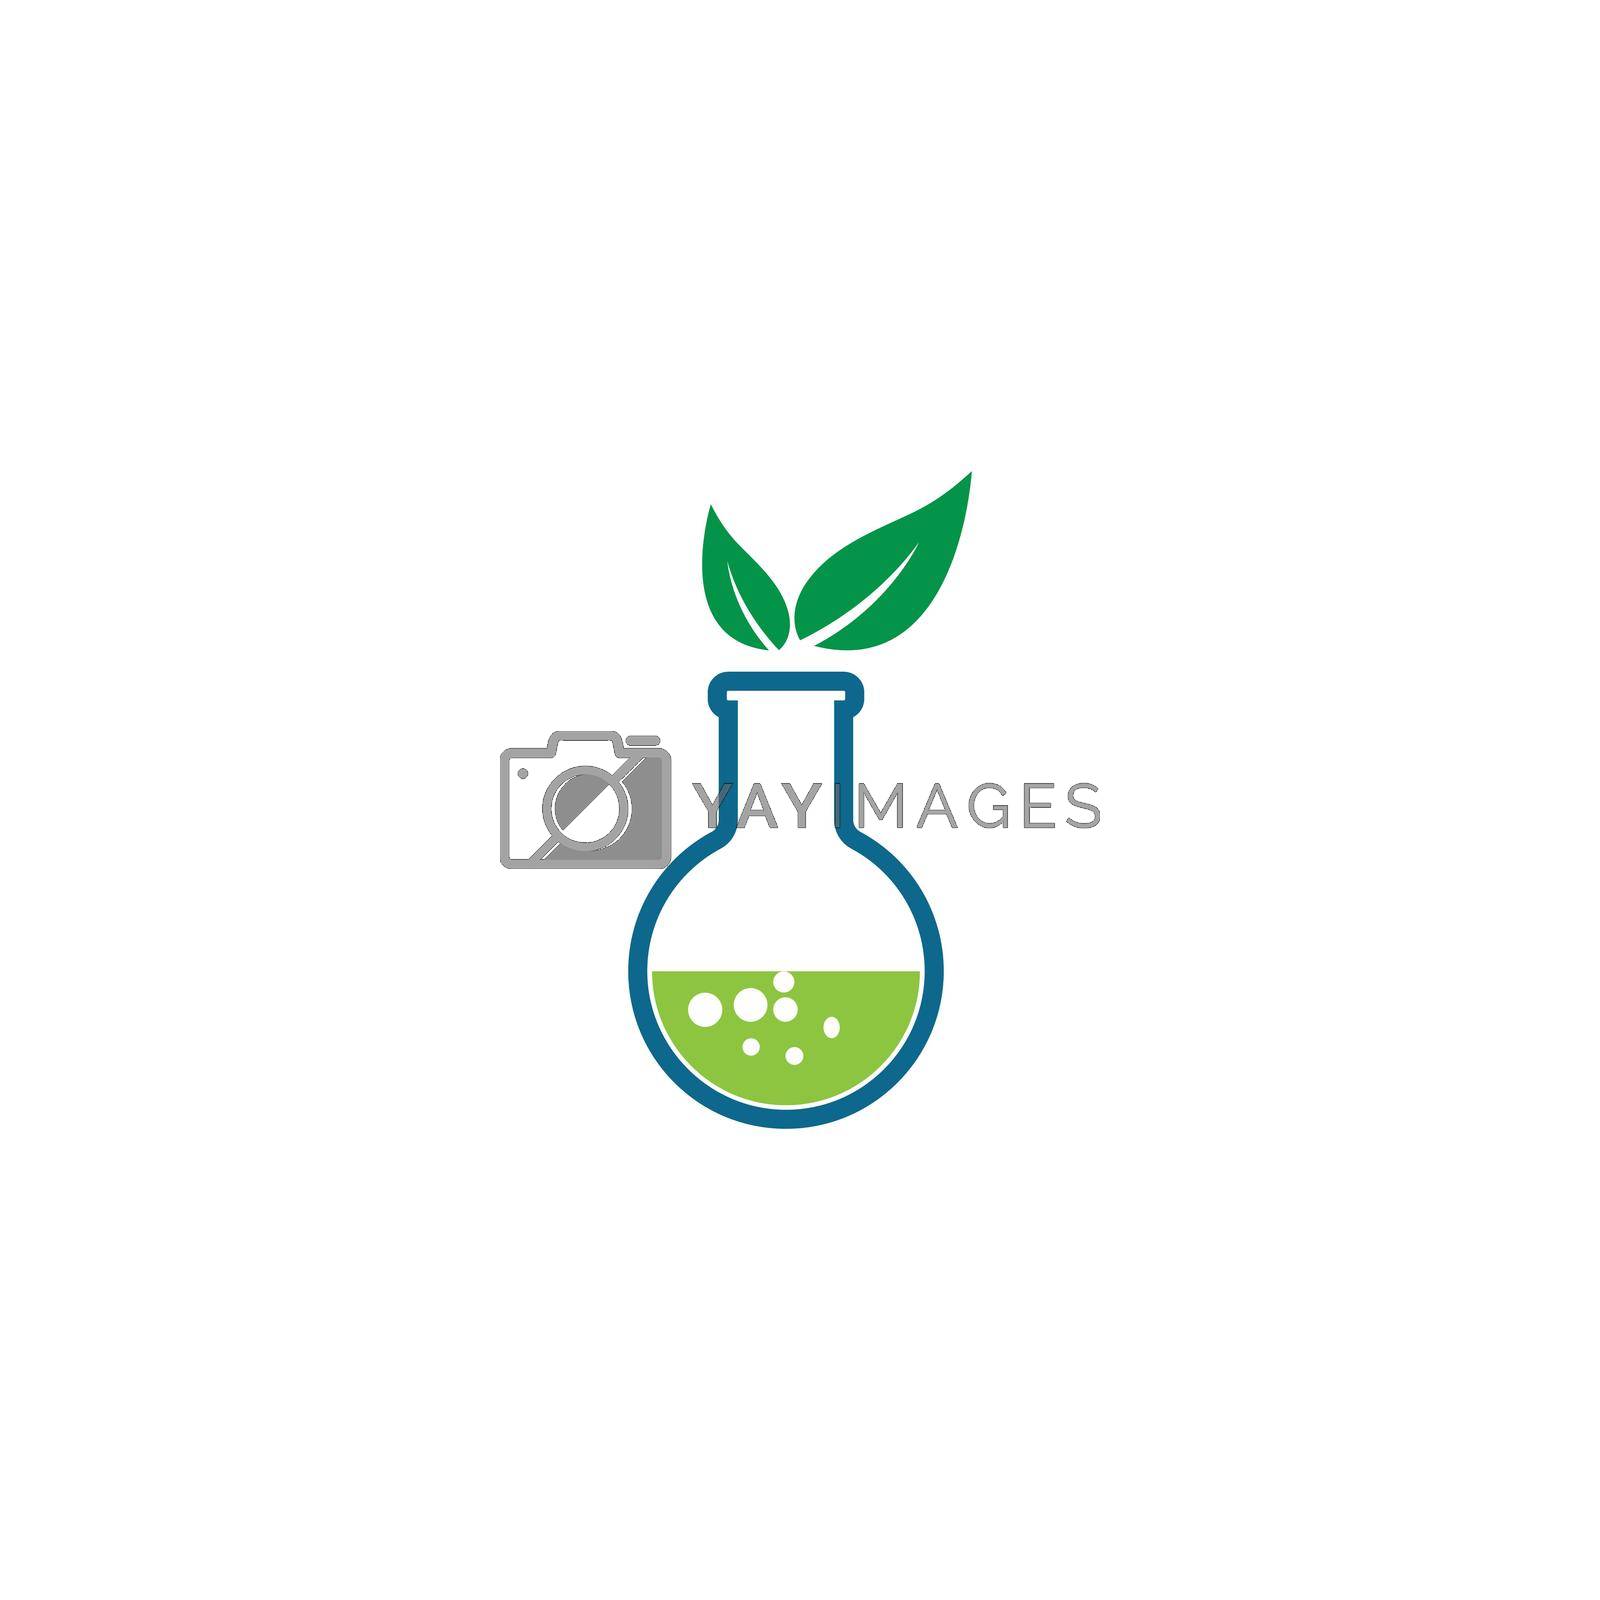 Royalty free image of Lab logo vector  by awk